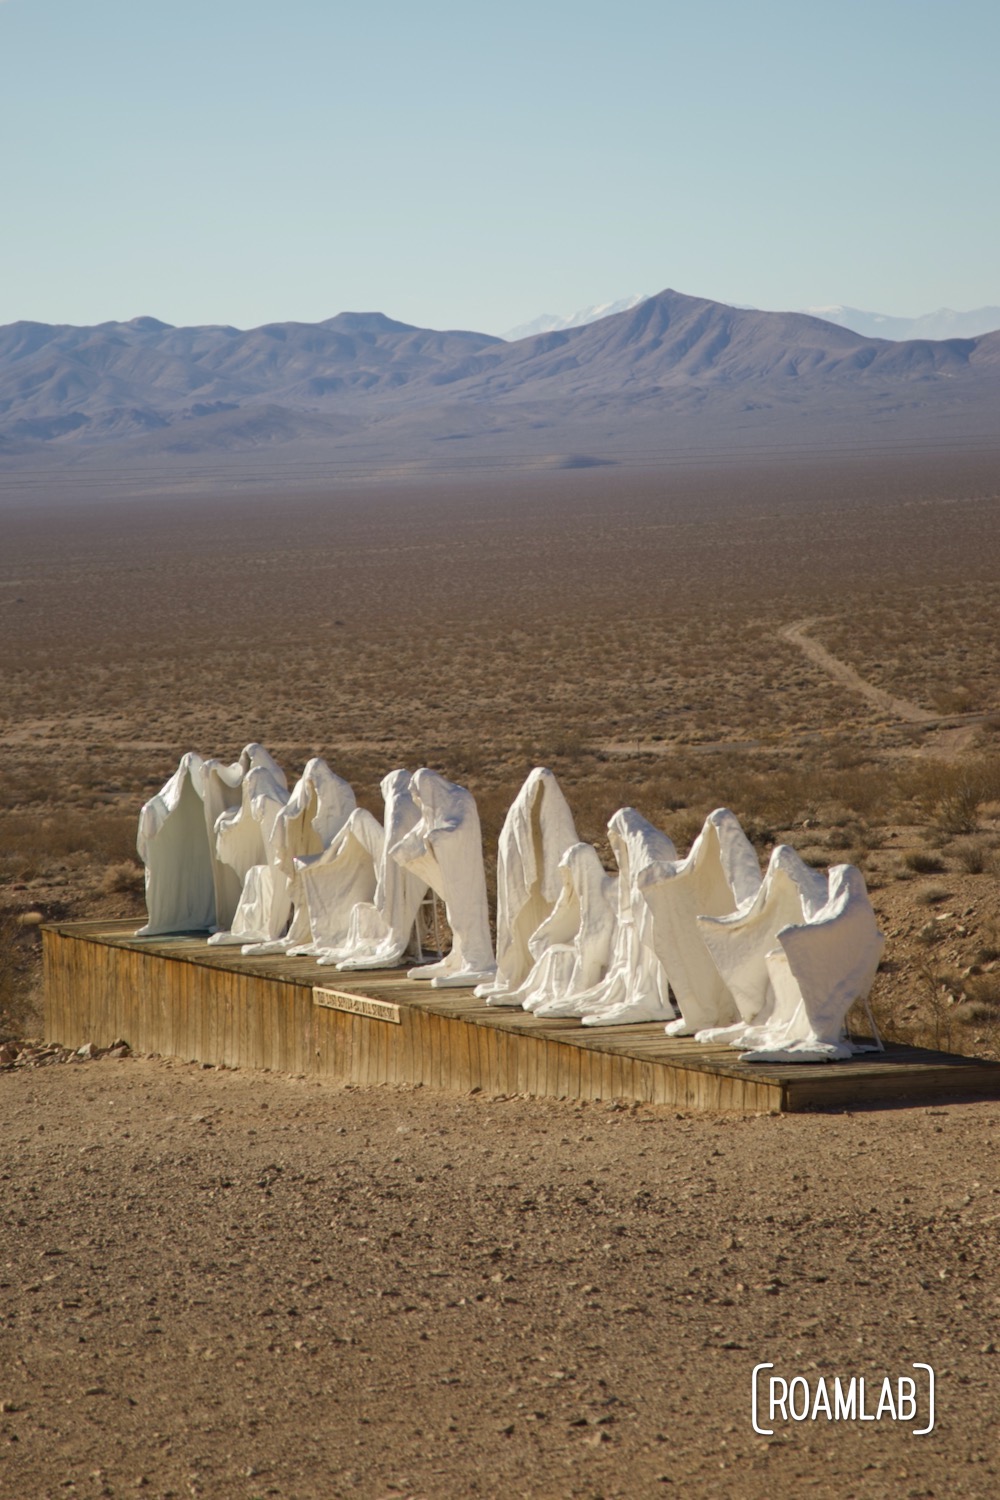 Plaster ghost sculptures in the form of the last supper on a wood platform with the Nevada desert and mountains in the background.